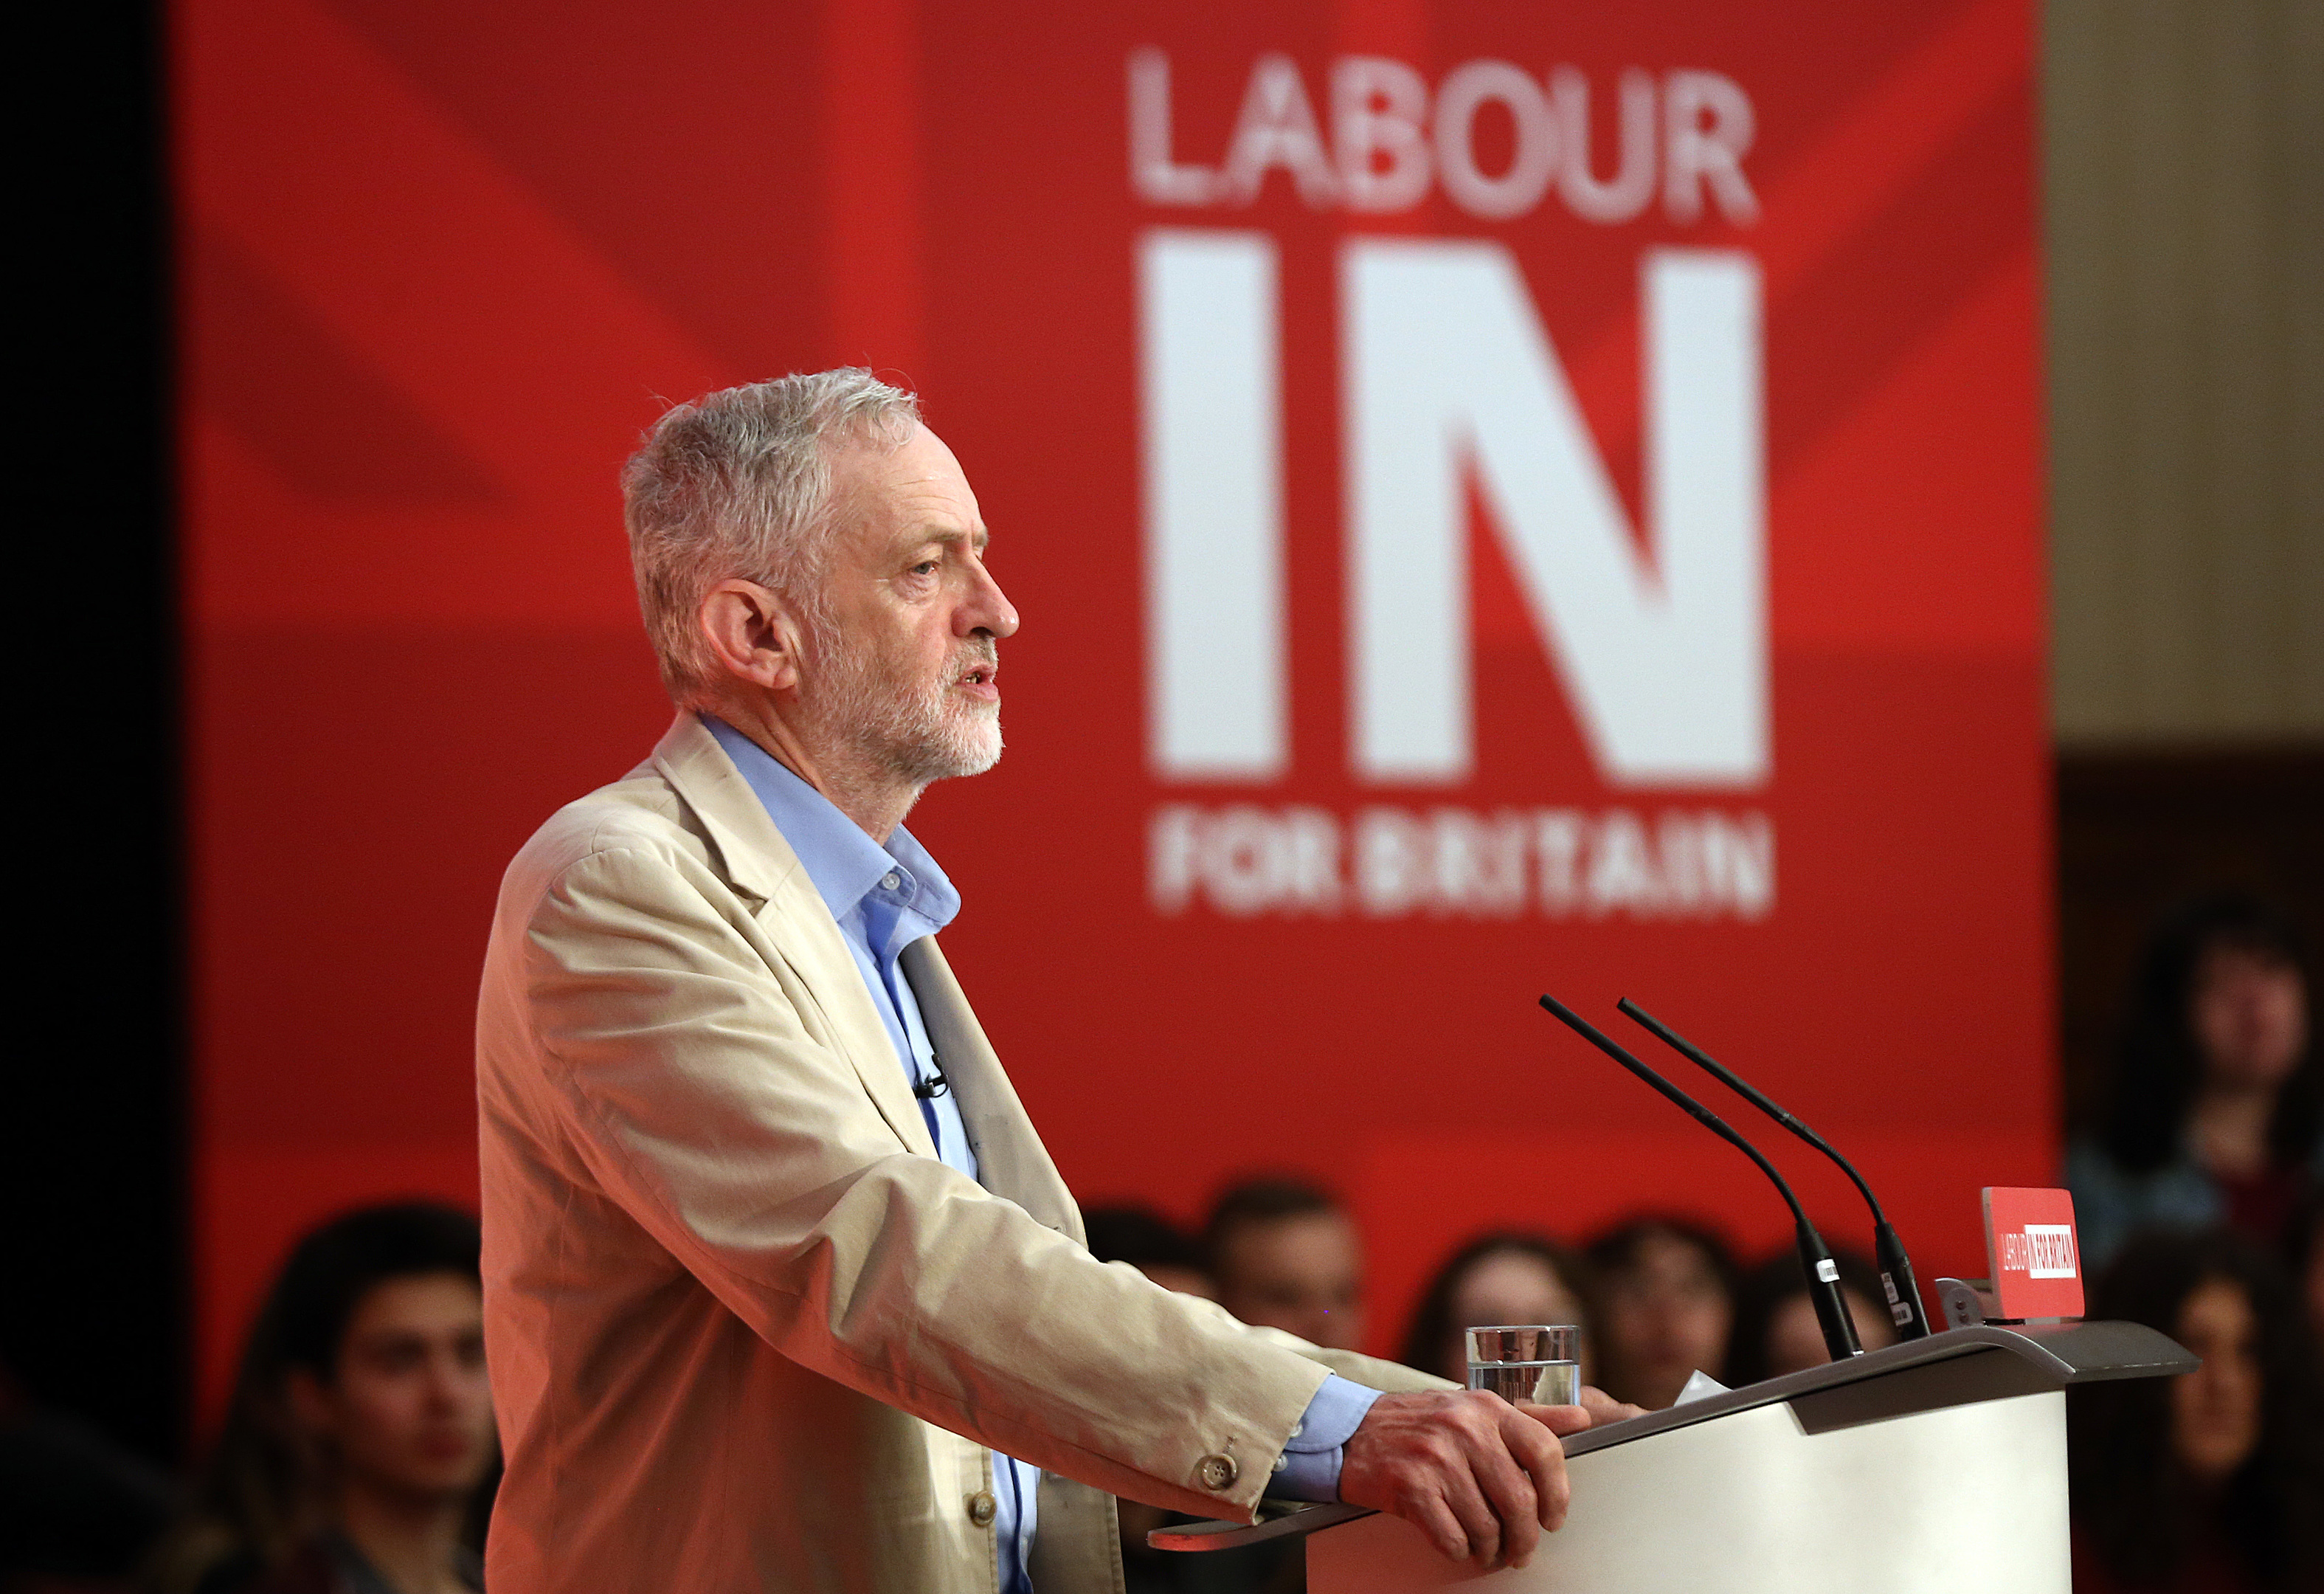 Jeremy Corbyn, addresses supporters and members of the media as he states Labour's case for staying in the EU (Carl Court/Getty Images)